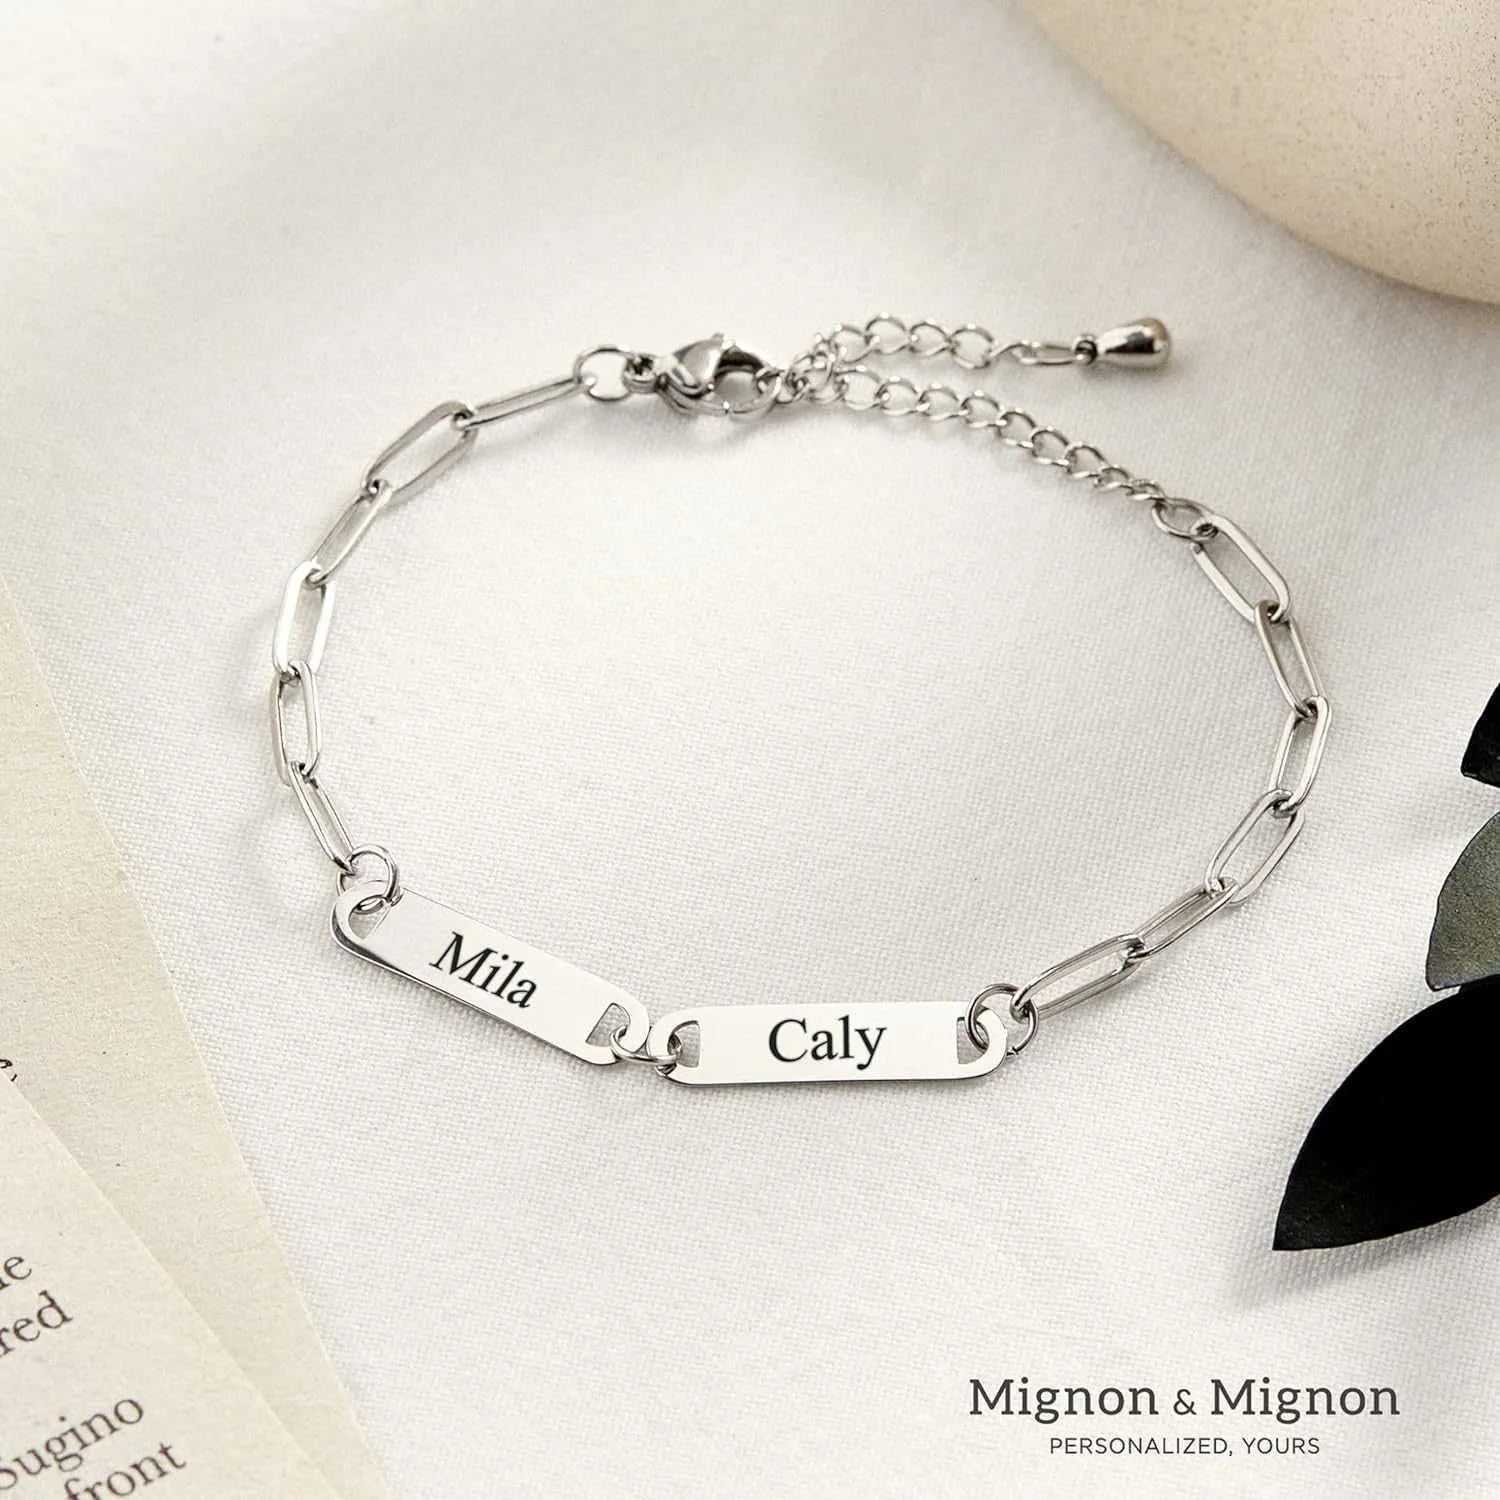 ets MignonandMignon Multiple Name Charm Bracelet for Friendship Mothers Day Gift Couples Names Custom Engraved Personalized -P-1BR-W